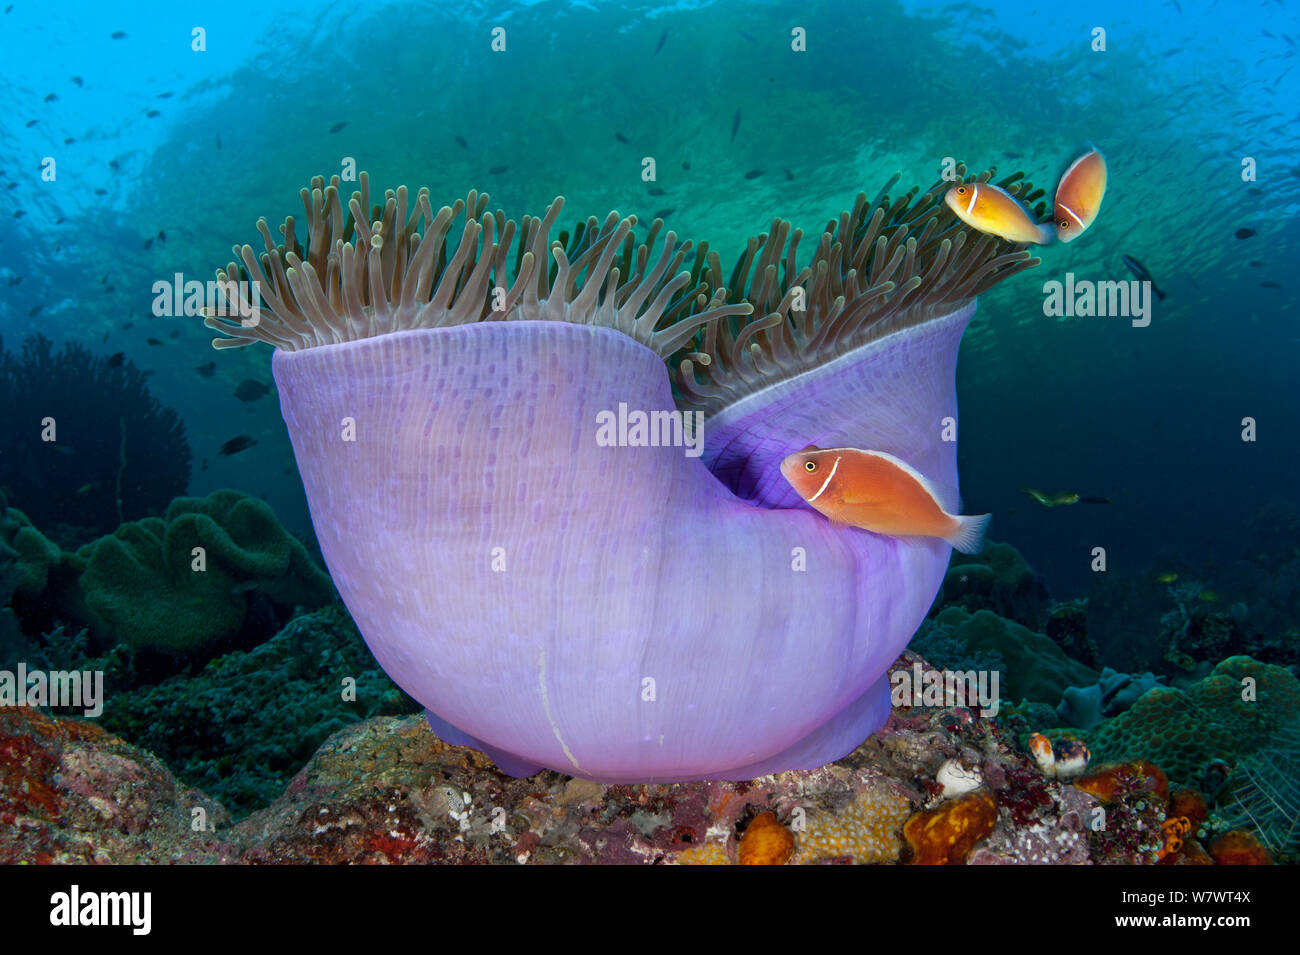 Pink anemonefish (Amphiprion perideraion) in Purple magnificent sea anemone (Heteractis magnifica) Misool, Raja Ampat, West Papua, Indonesia. Tropical West Pacific Ocean. Stock Photo